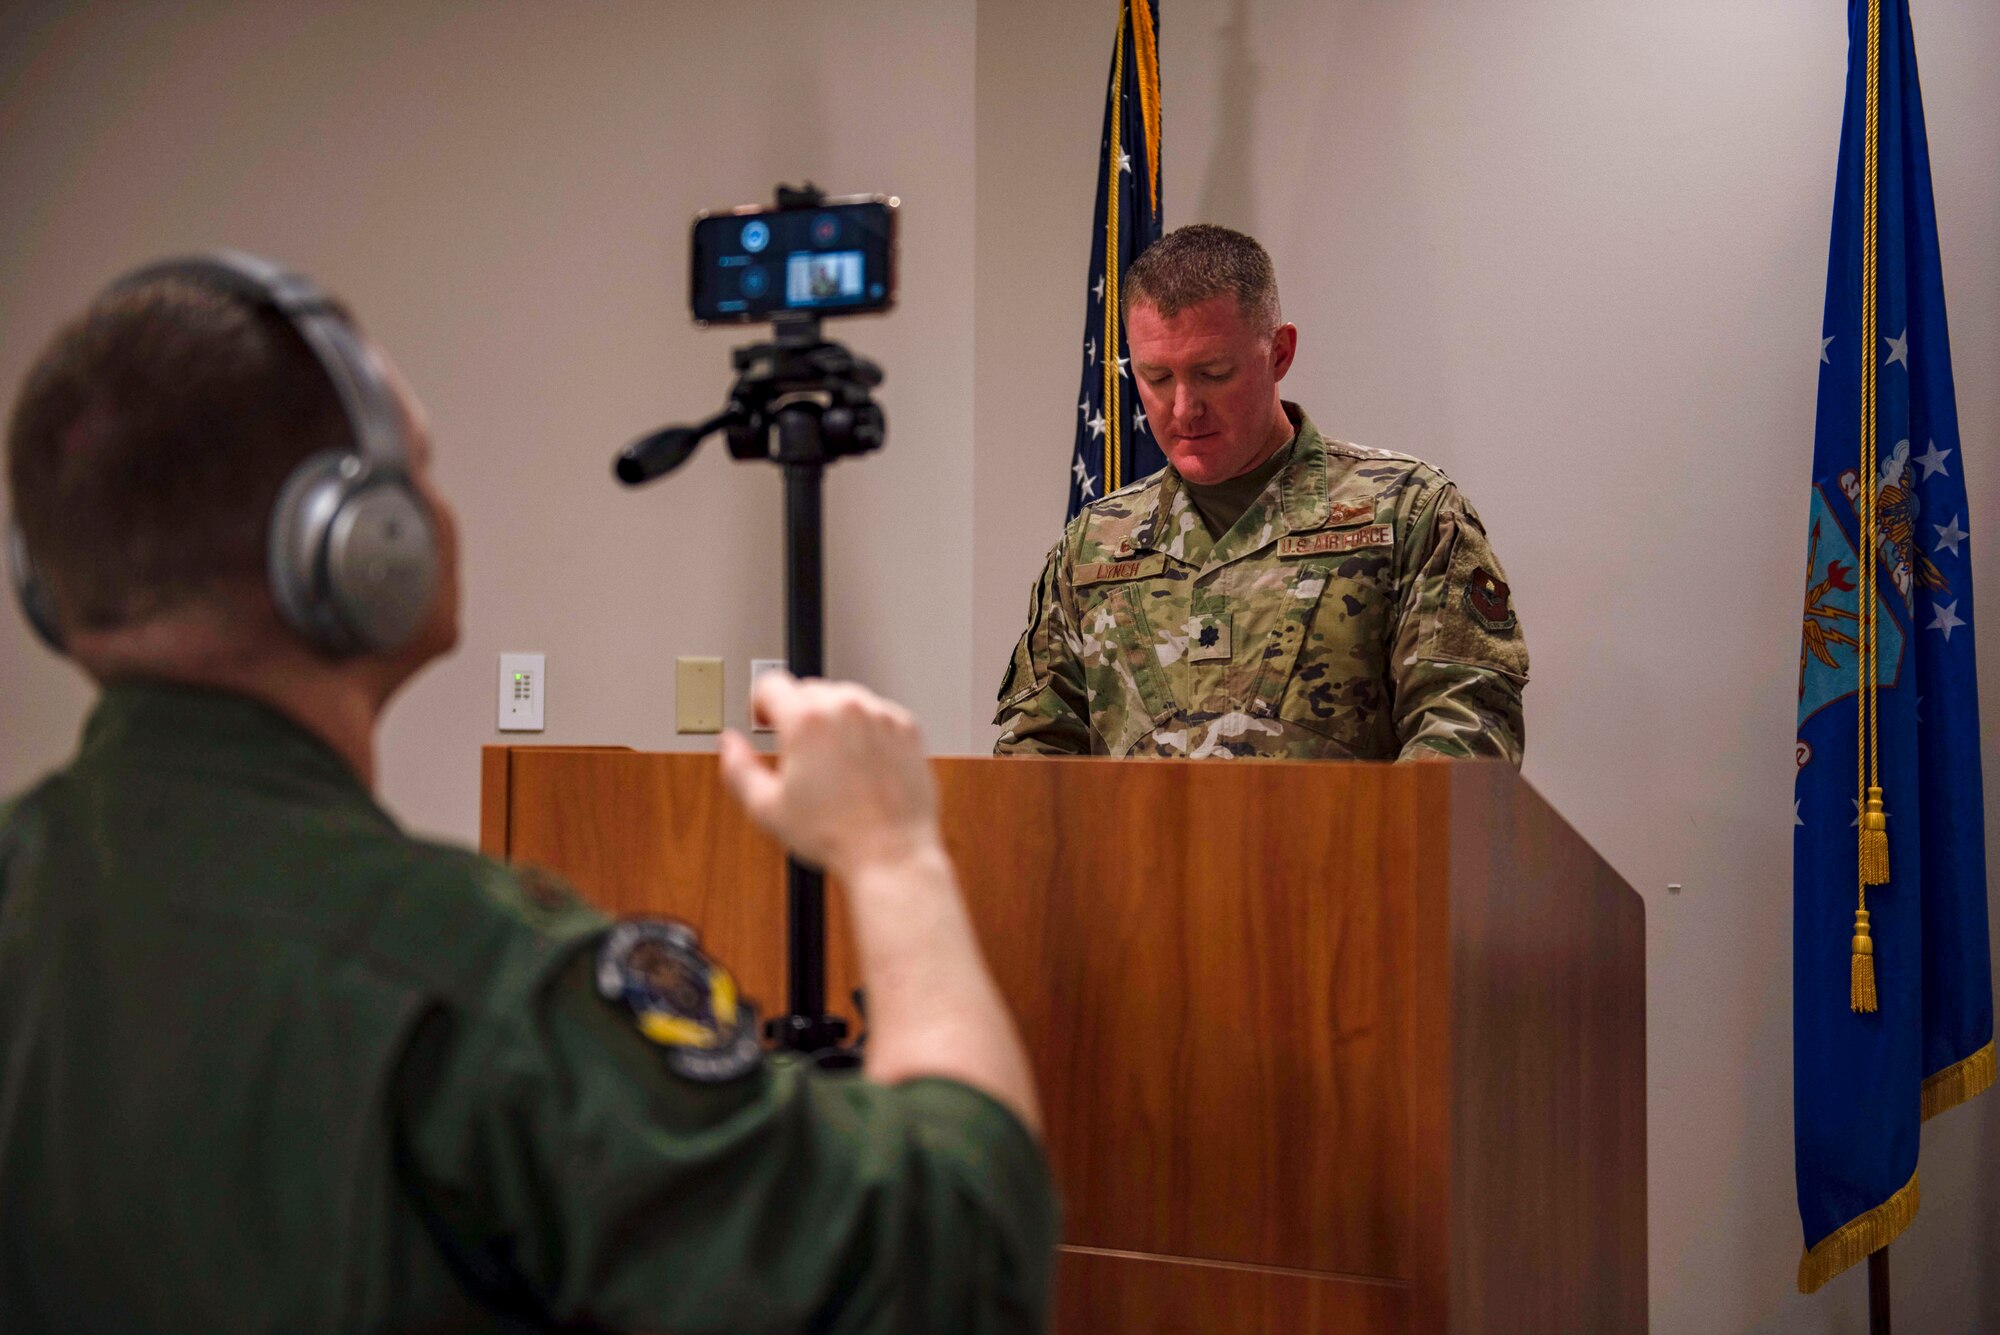 U.S. Air Force Maj. Jason Spicer, 337th Air Control Squadron, assistant director of operations, records U.S. Air Force Lt. Col. Michael Lynch, 337th ACS, commander, during a virtual ceremony held at the 337th ACS Air Battle Manager schoolhouse at Tyndall Air Force Base, Florida, May 26, 2020. The ceremony was held to honor the naming and dedication of Building 1285 after retired Gen. Lori Robinson who became the highest ranking ABM and the first female combatant commander in military history. (U.S. Air Force photo by Staff Sgt. Magen M. Reeves)